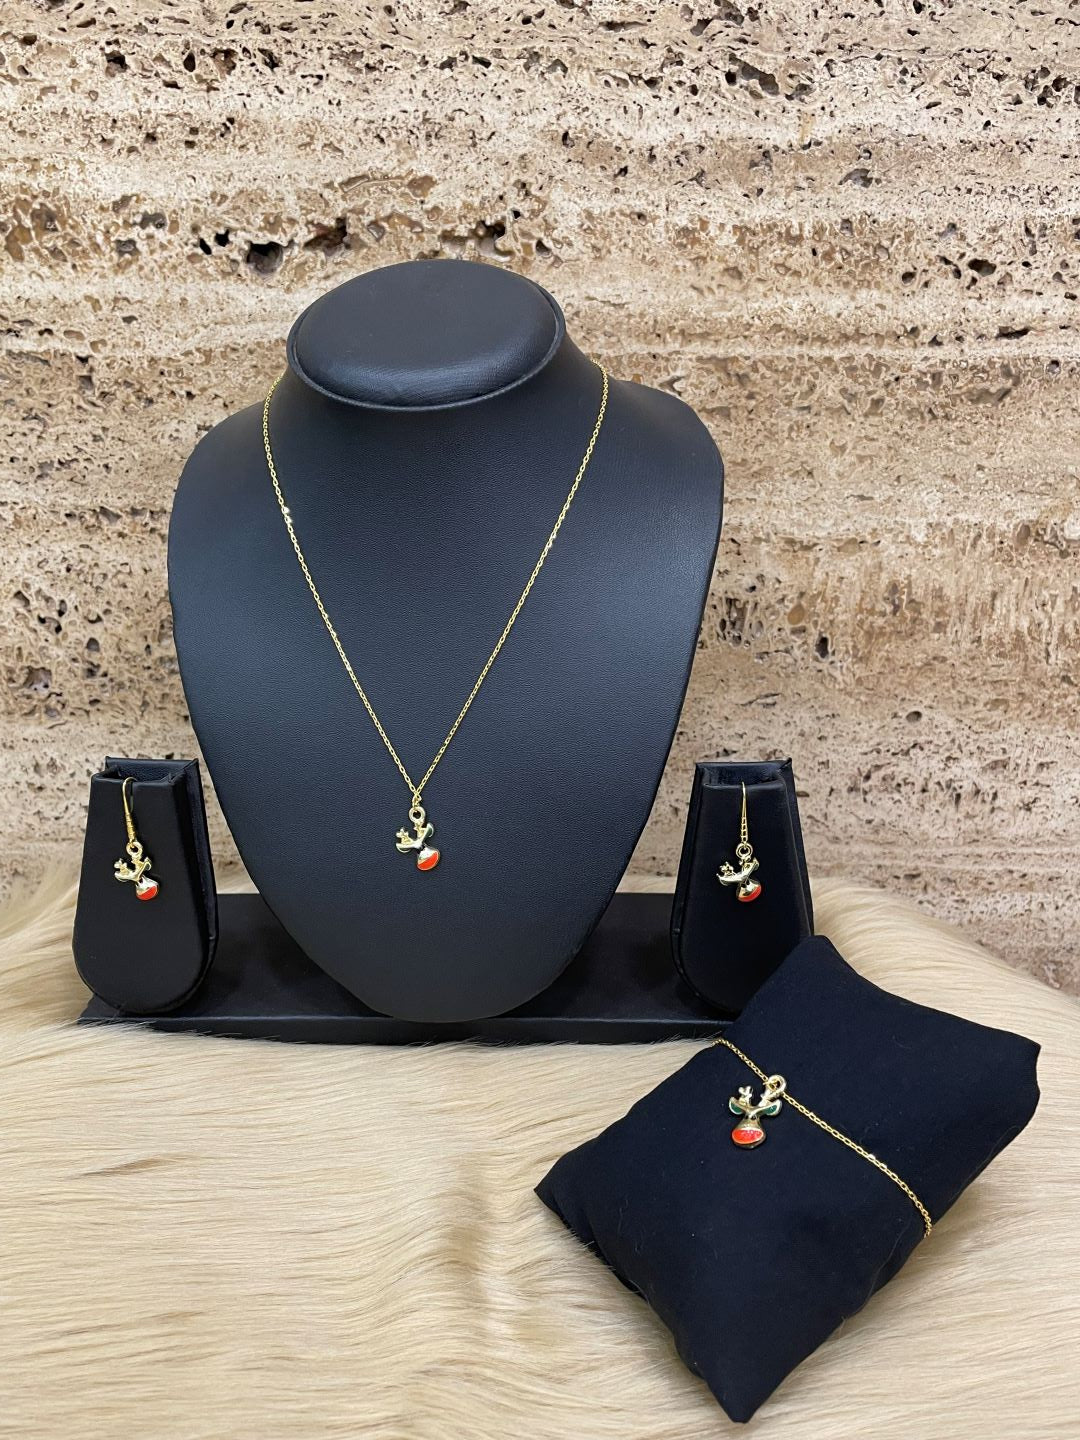 3.11US $ 85% OFF|Black Necklace Earring Wedding Party | Wedding Black  Necklace Earring Set - … | Bridal jewelry sets, Prom jewelry sets, Crystal  bridal jewelry sets